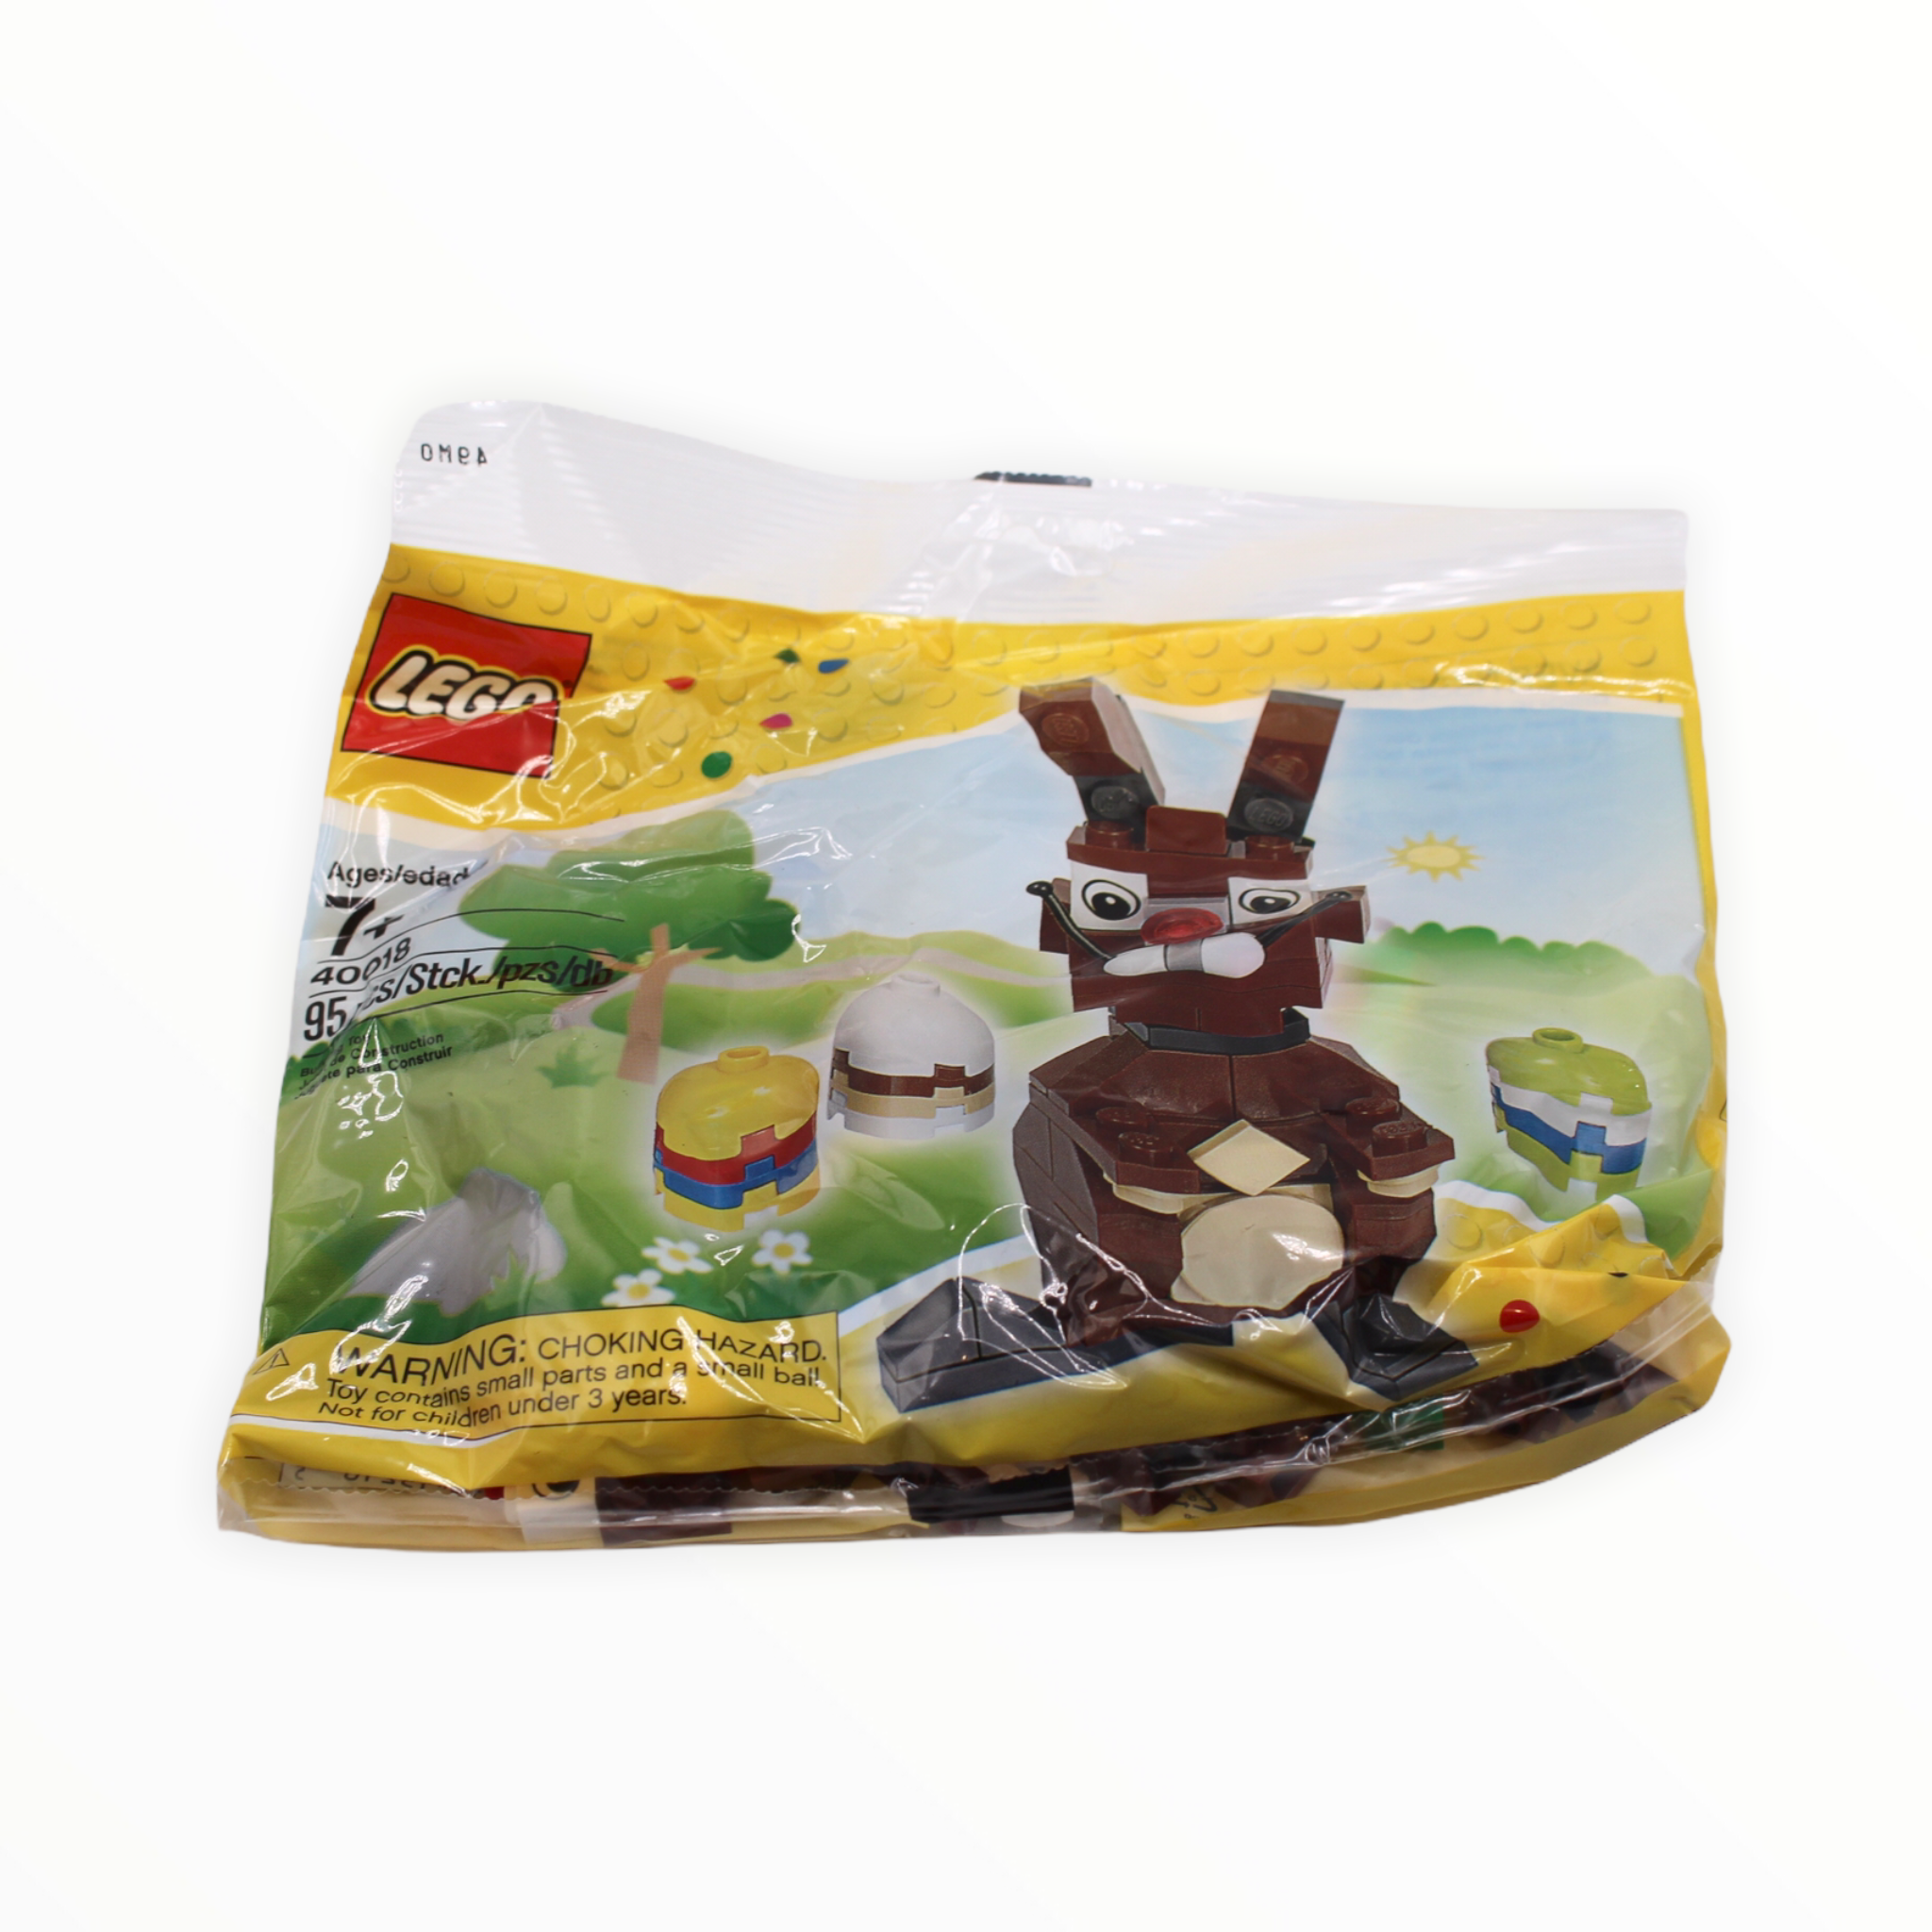 Polybag 40018 LEGO Easter Bunny with Eggs